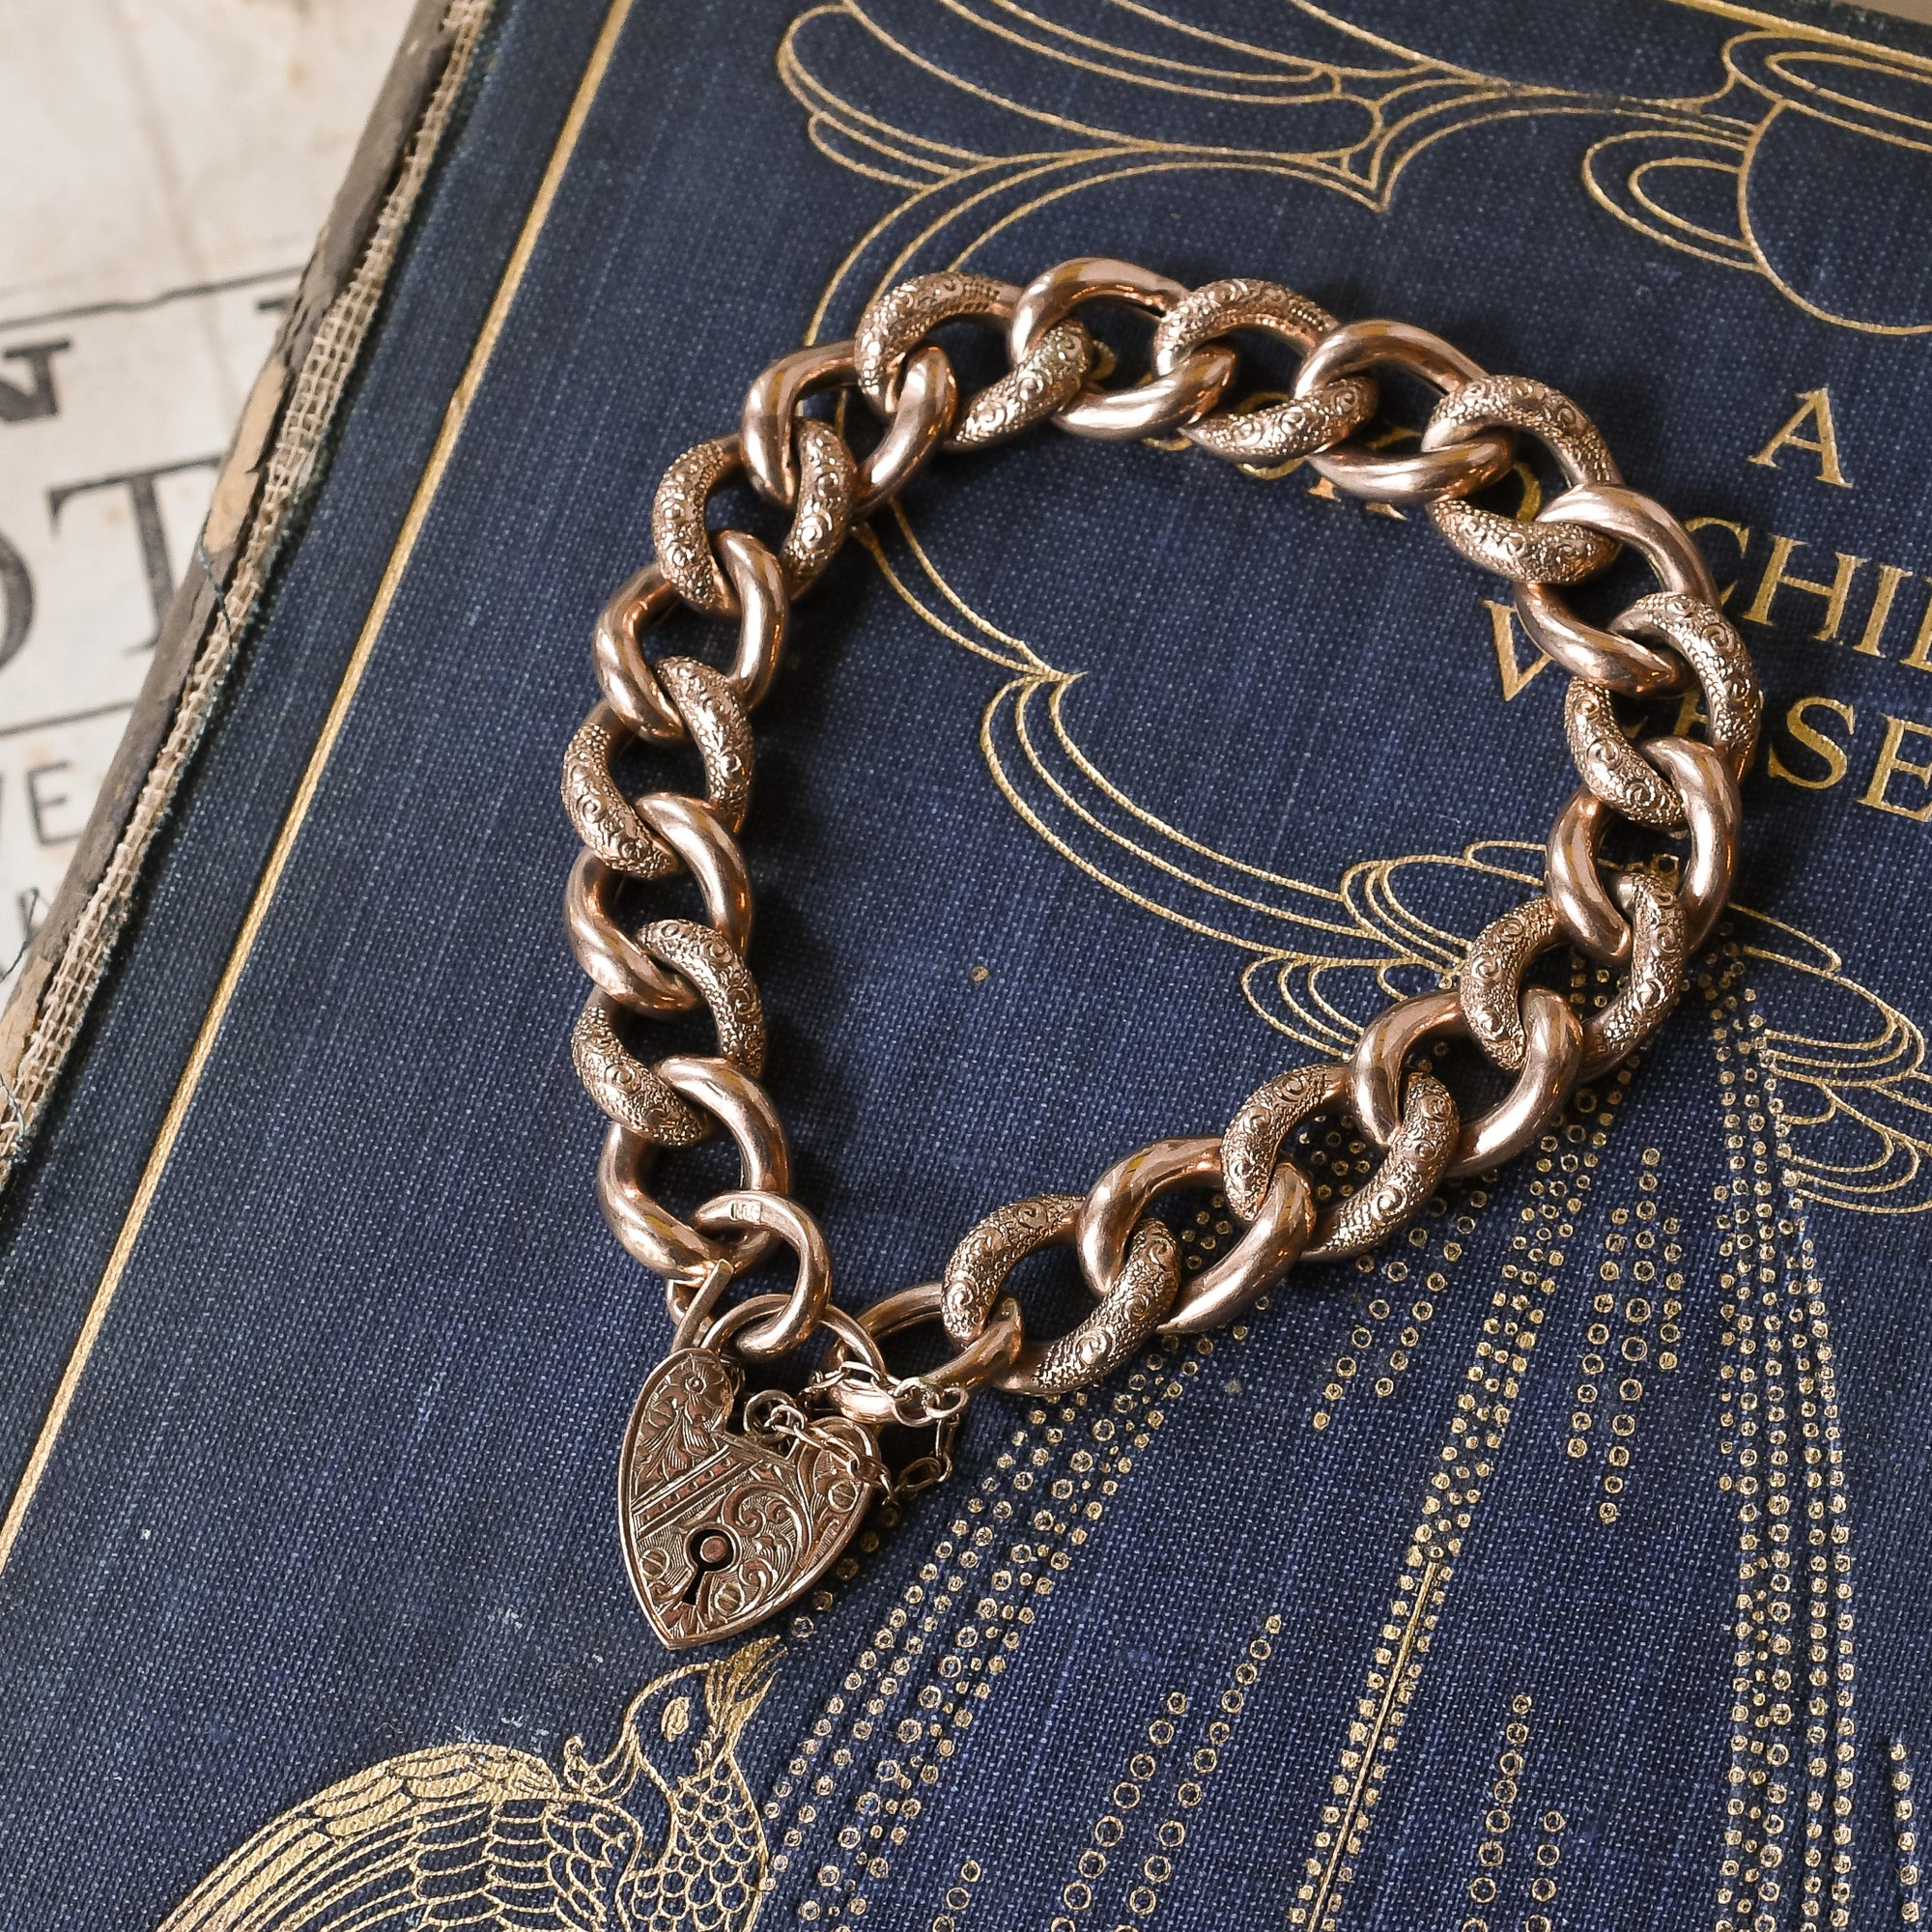 Lovely Antique 9k Rose Gold Curb Link Bracelet With Heart Lock Clasp -   Canada